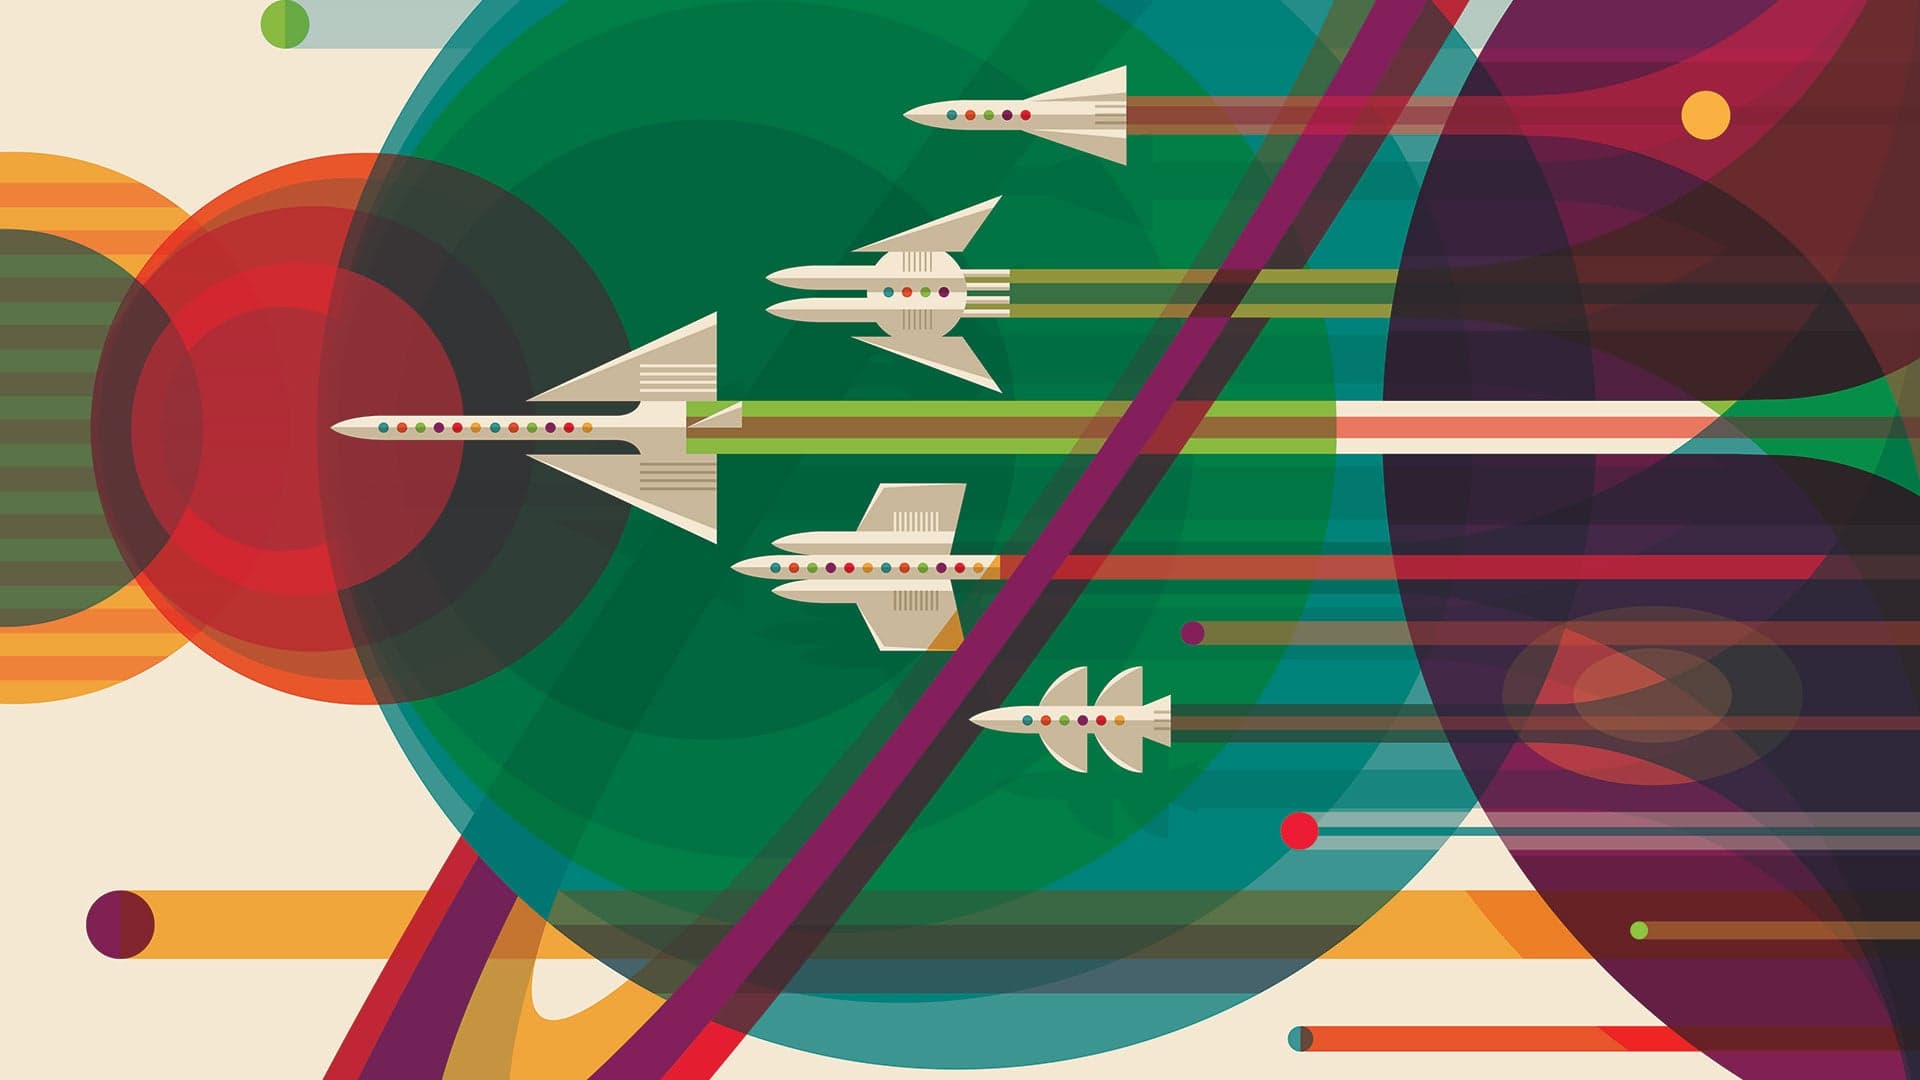 NASA’s Giving Away Brilliant Space Travel Posters For Free